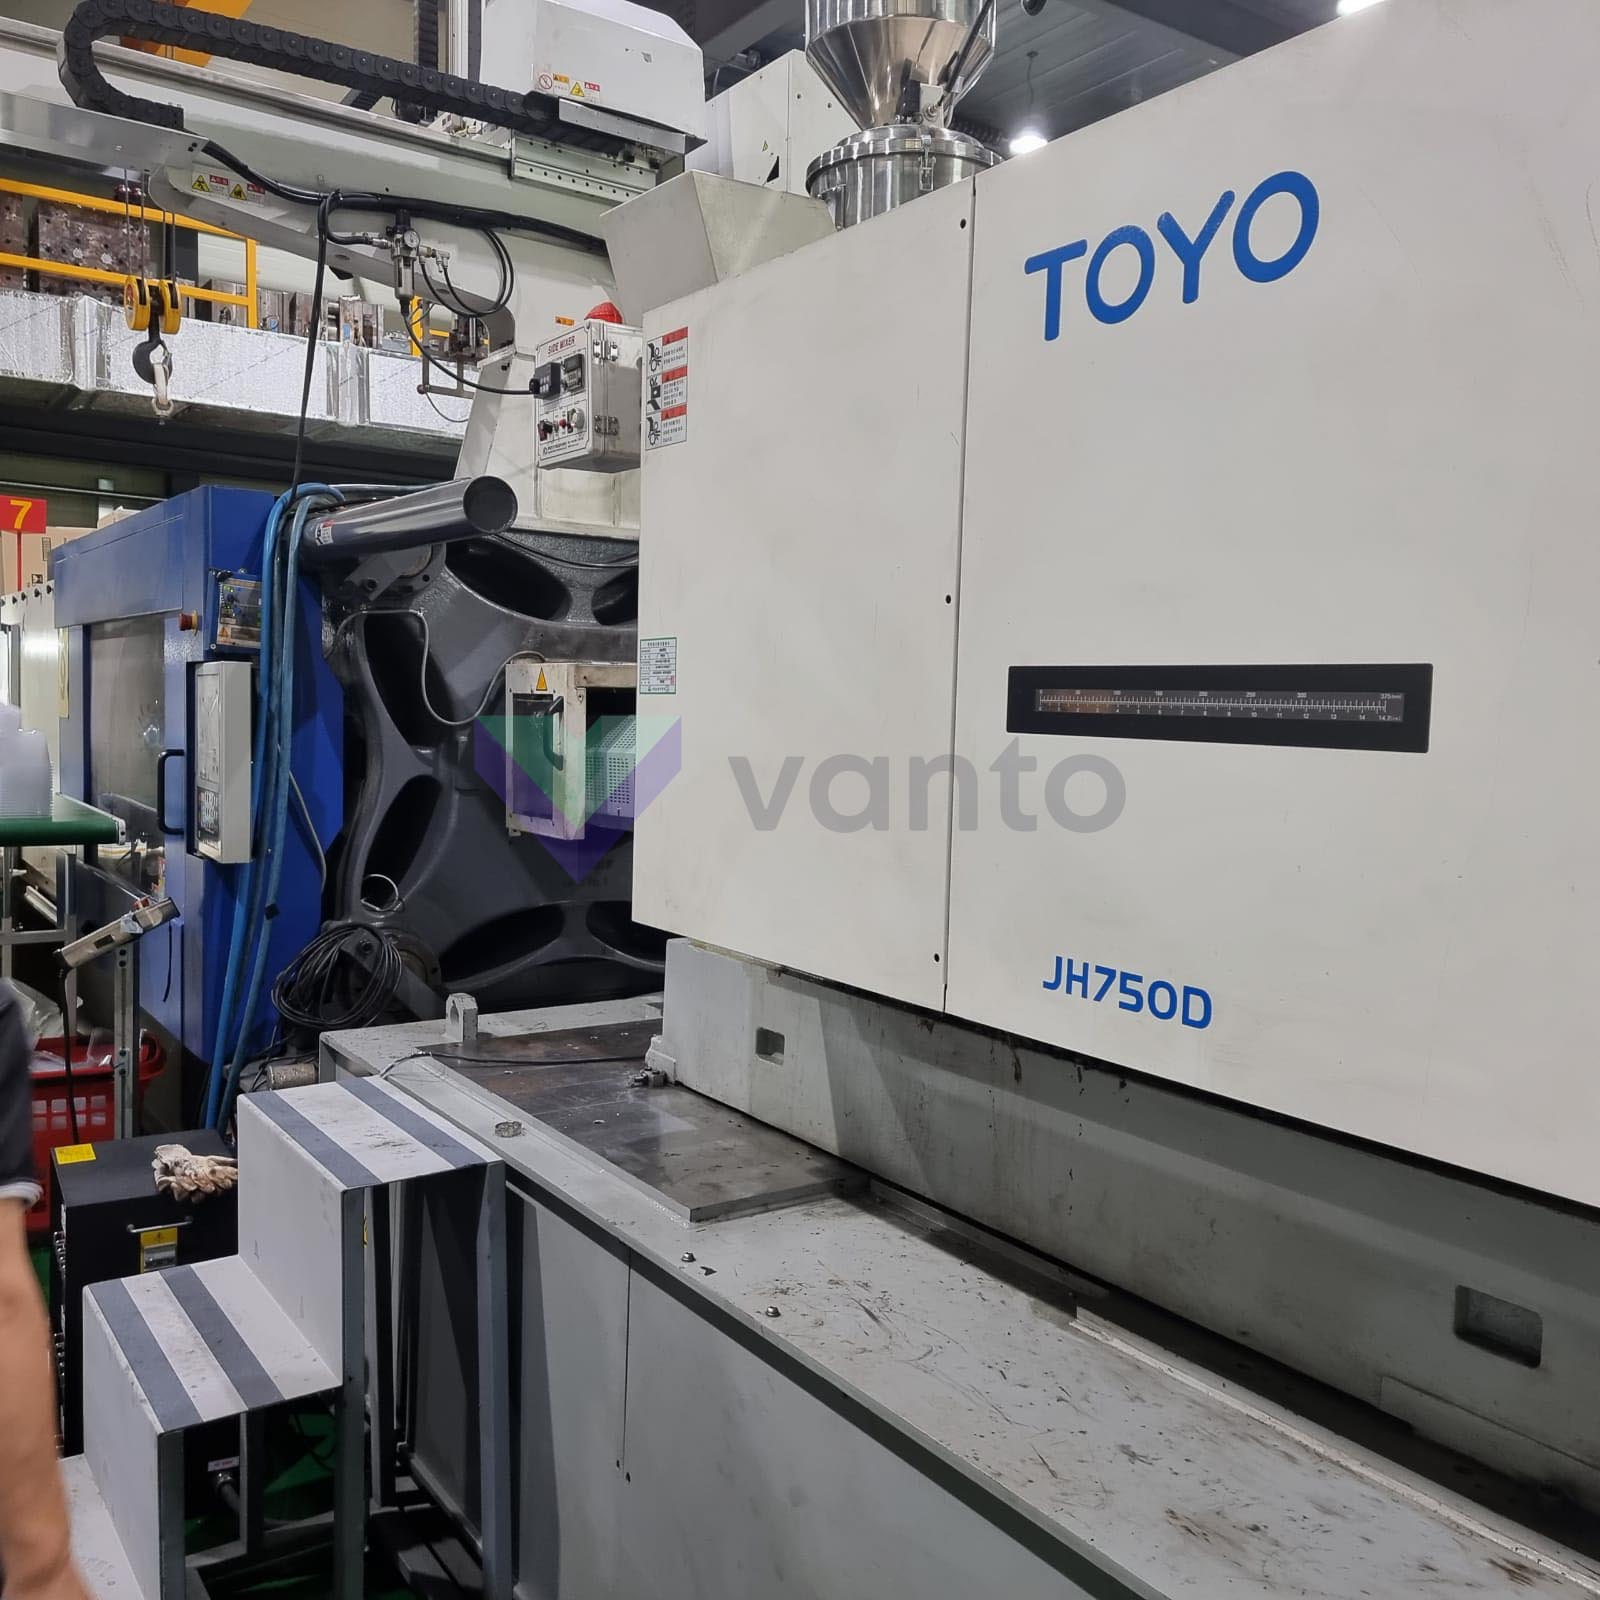 TOYO SI-450 450t all-electric injection molding machine (2017) id10850